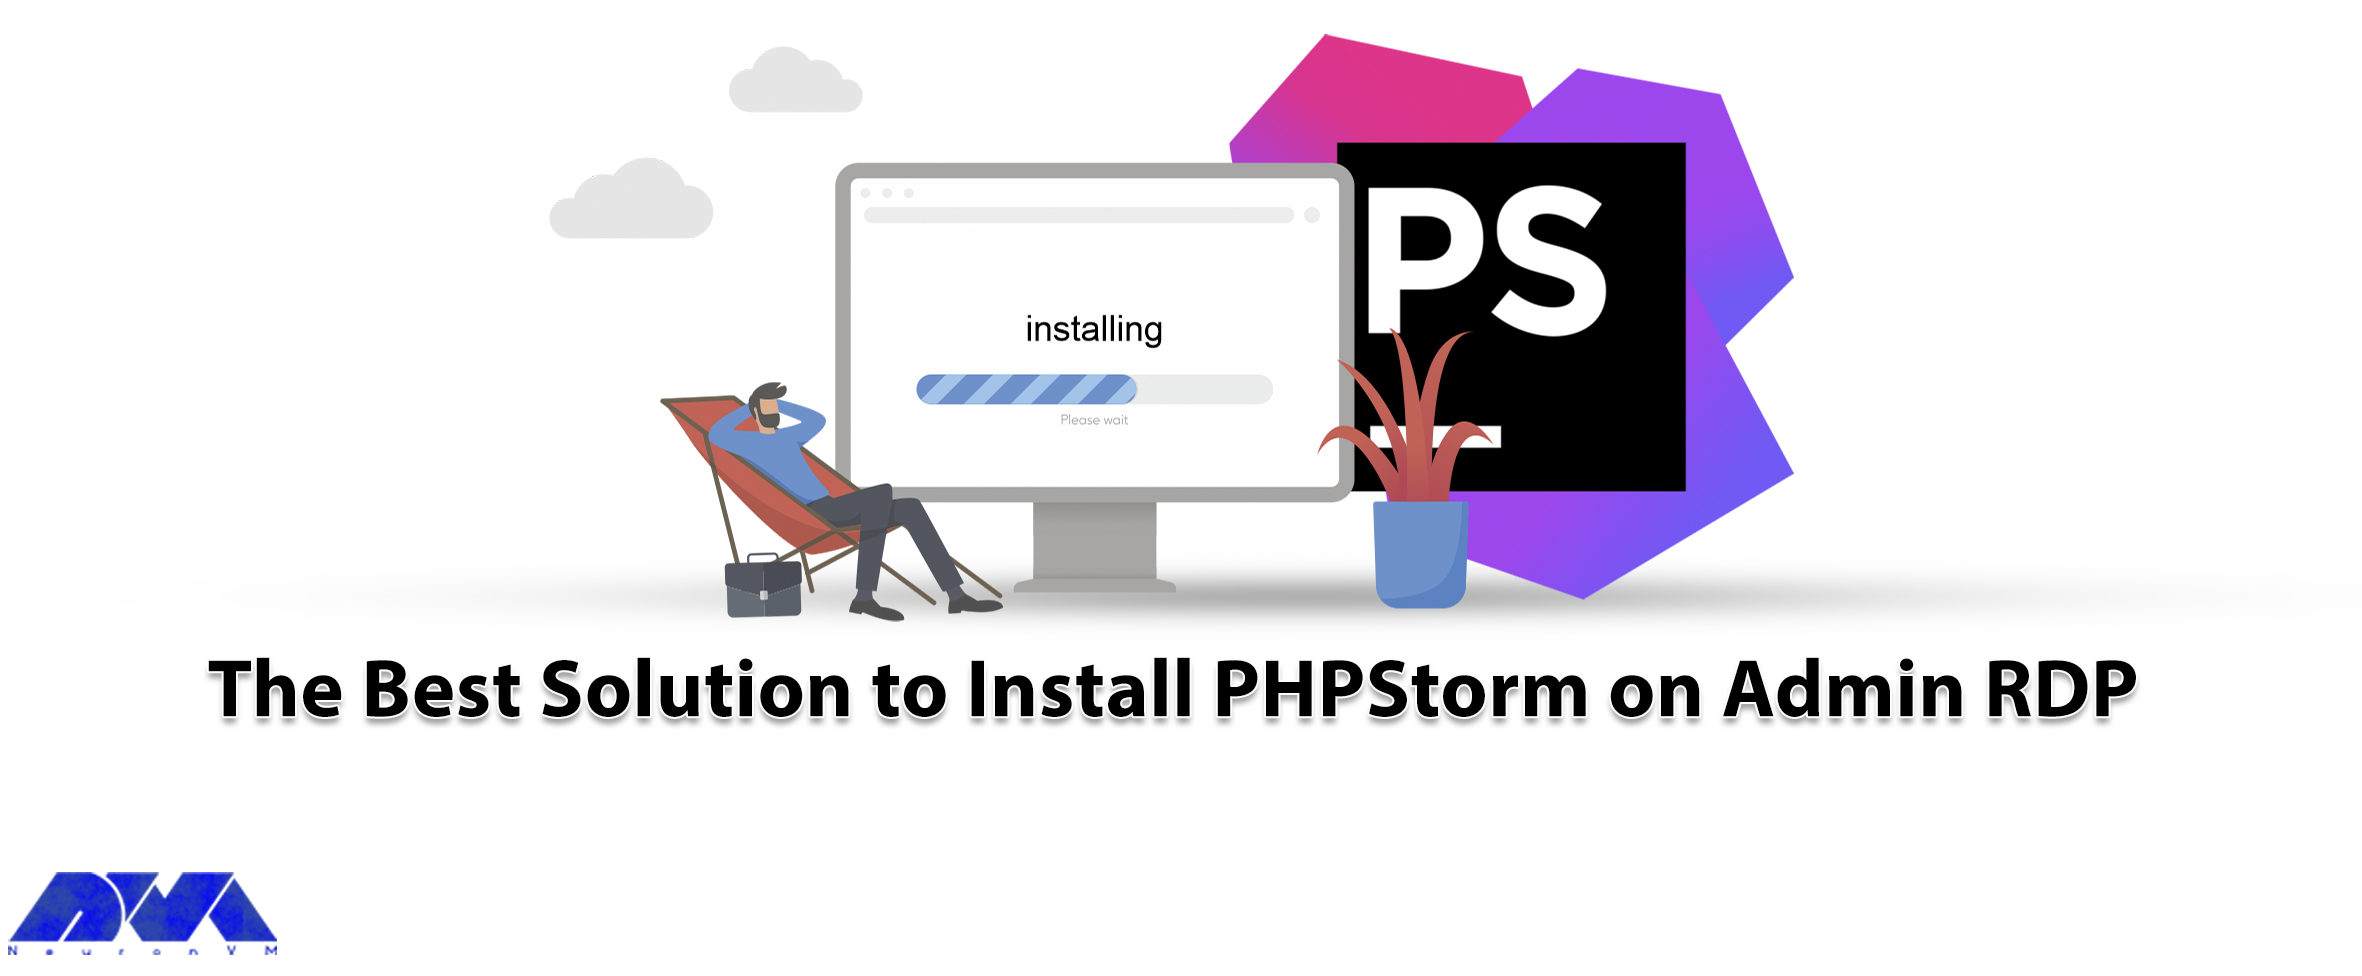 The Best Solution to Install PHPStorm on Admin RDP